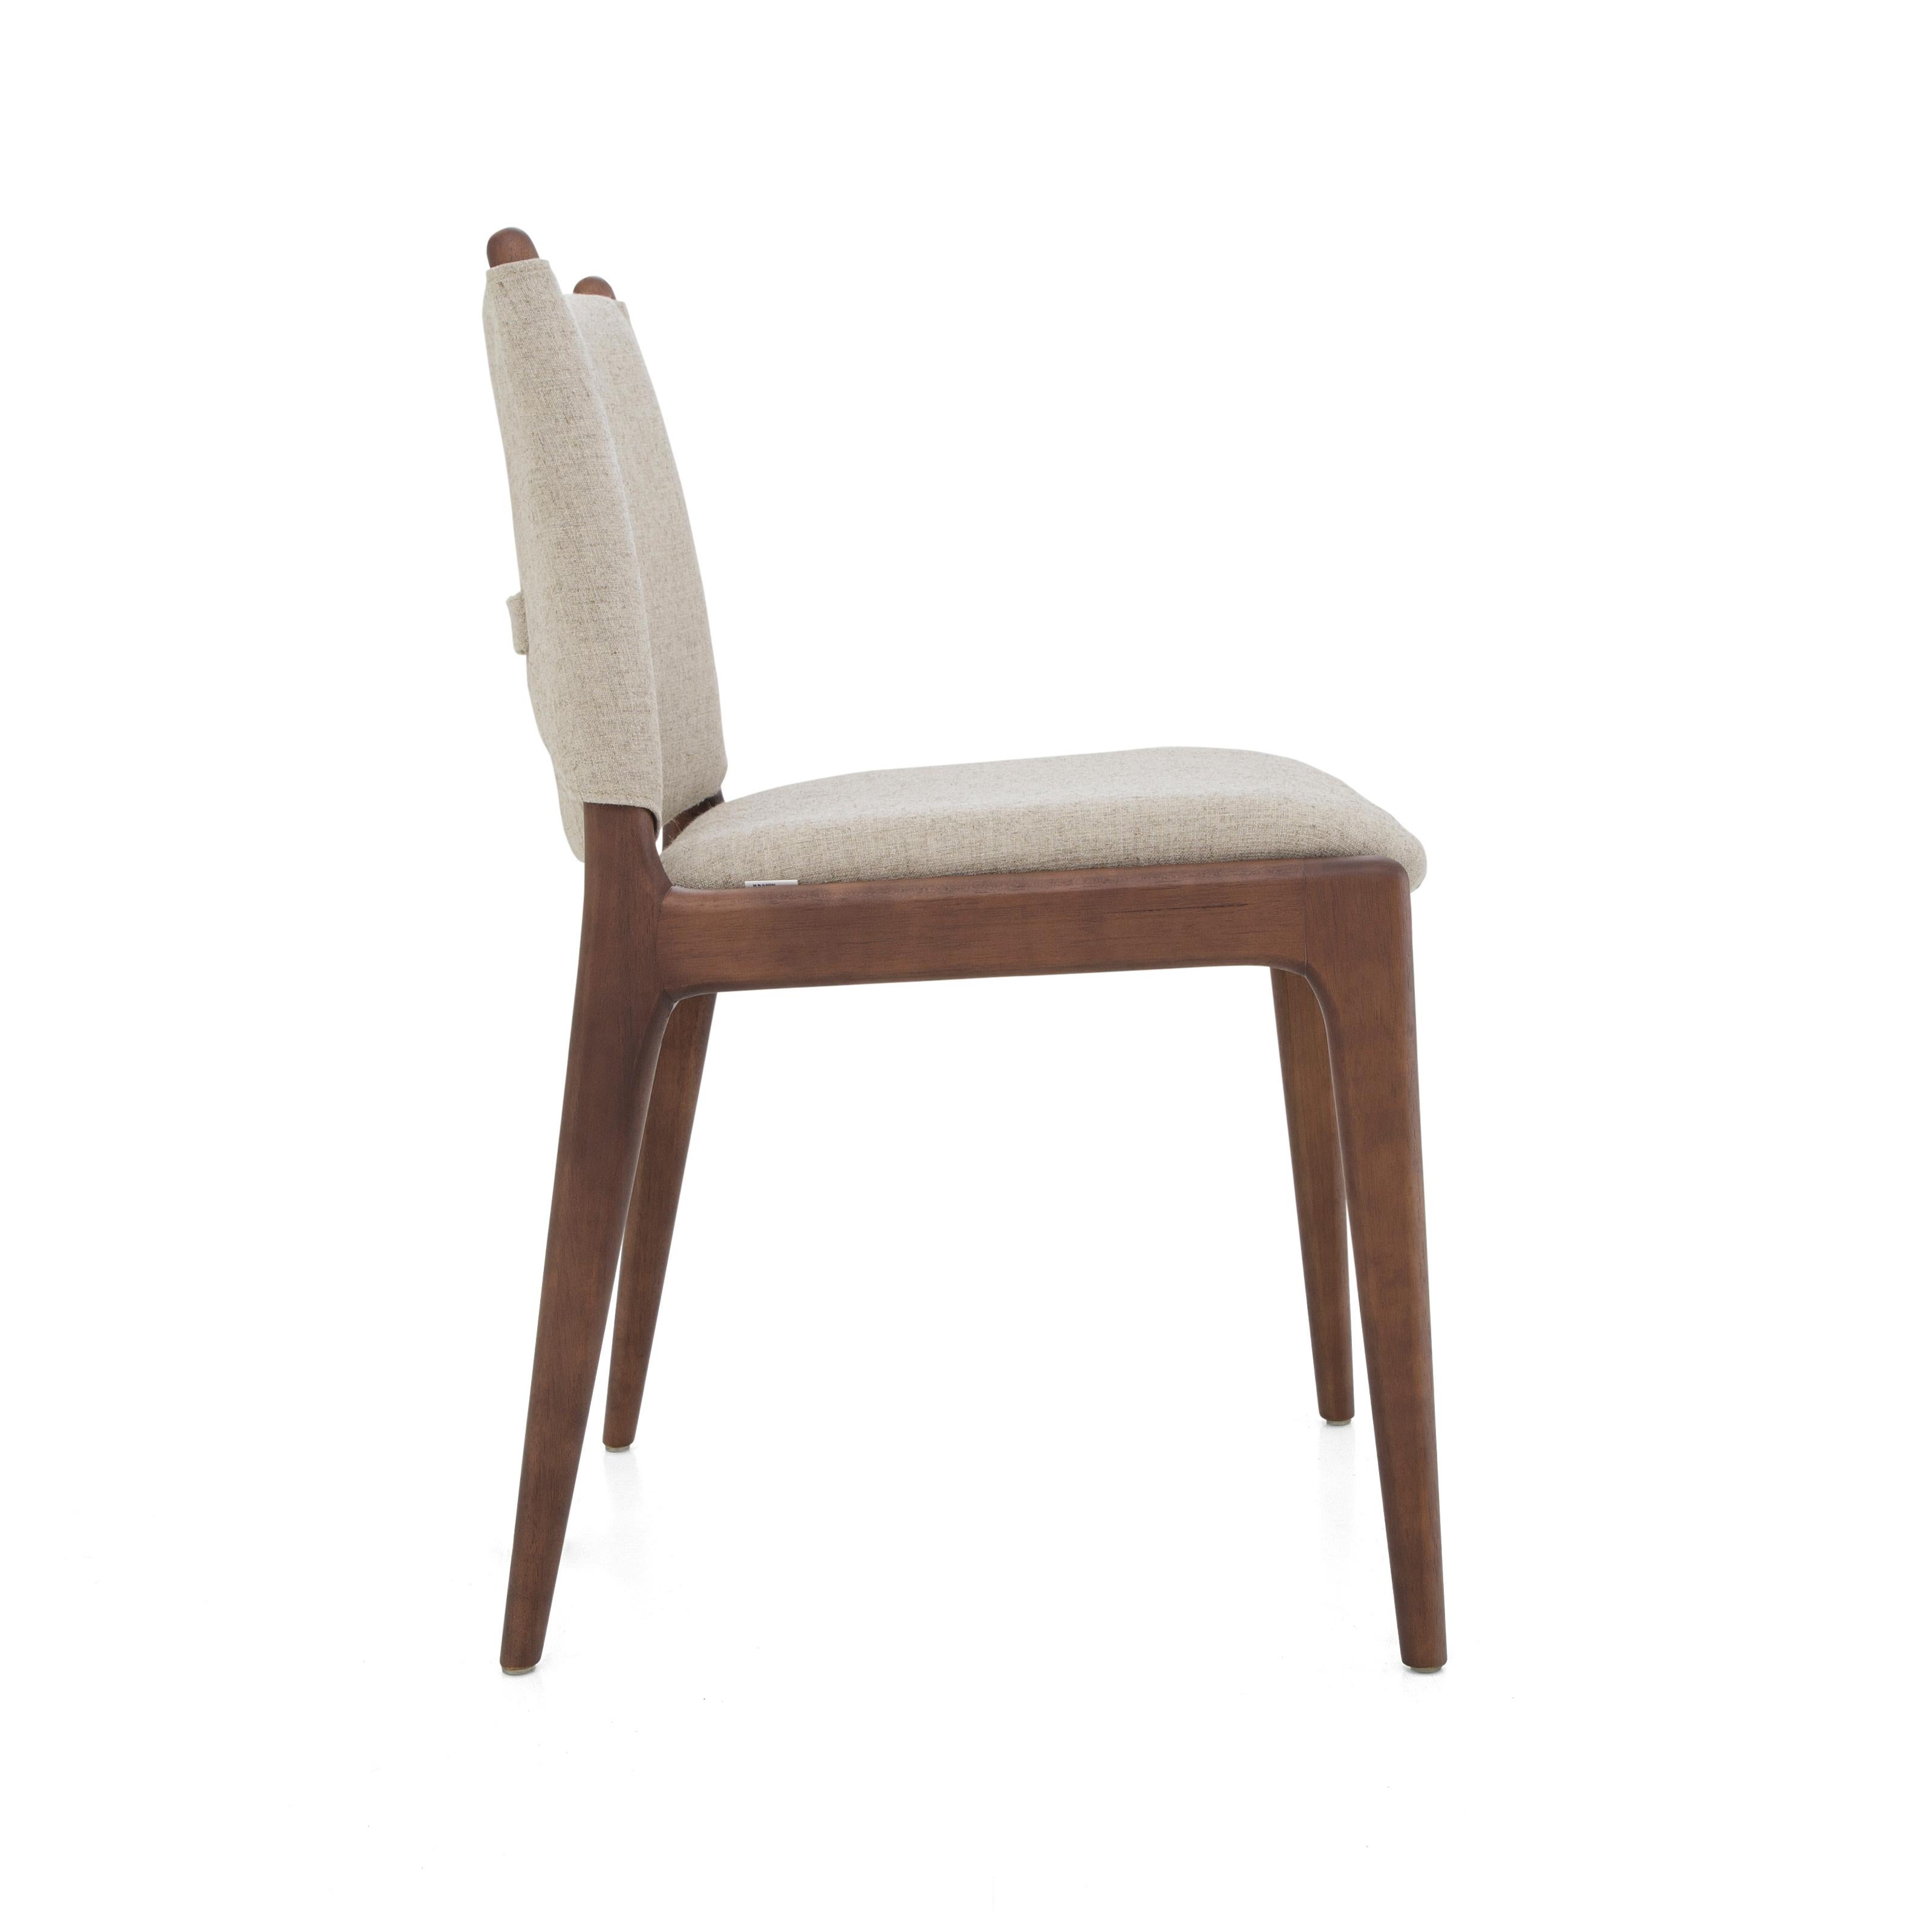 Cappio Dining Chair in Walnut Wood Finish with Beige Fabric, set of 2 In New Condition For Sale In Miami, FL